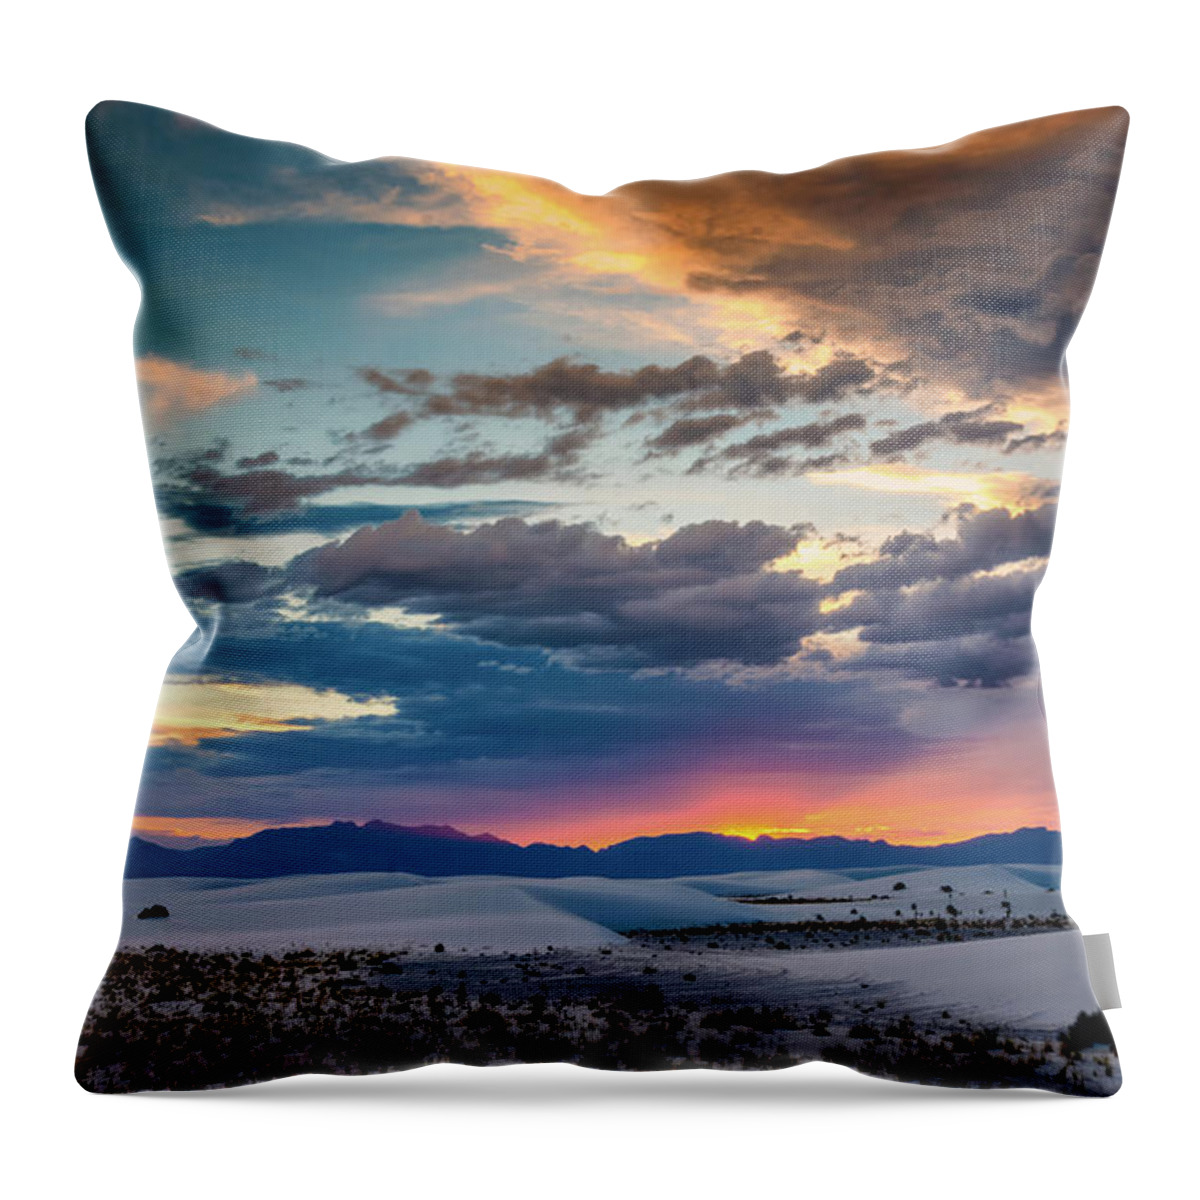 White Sands Throw Pillow featuring the photograph Stormy Sunset by James Barber